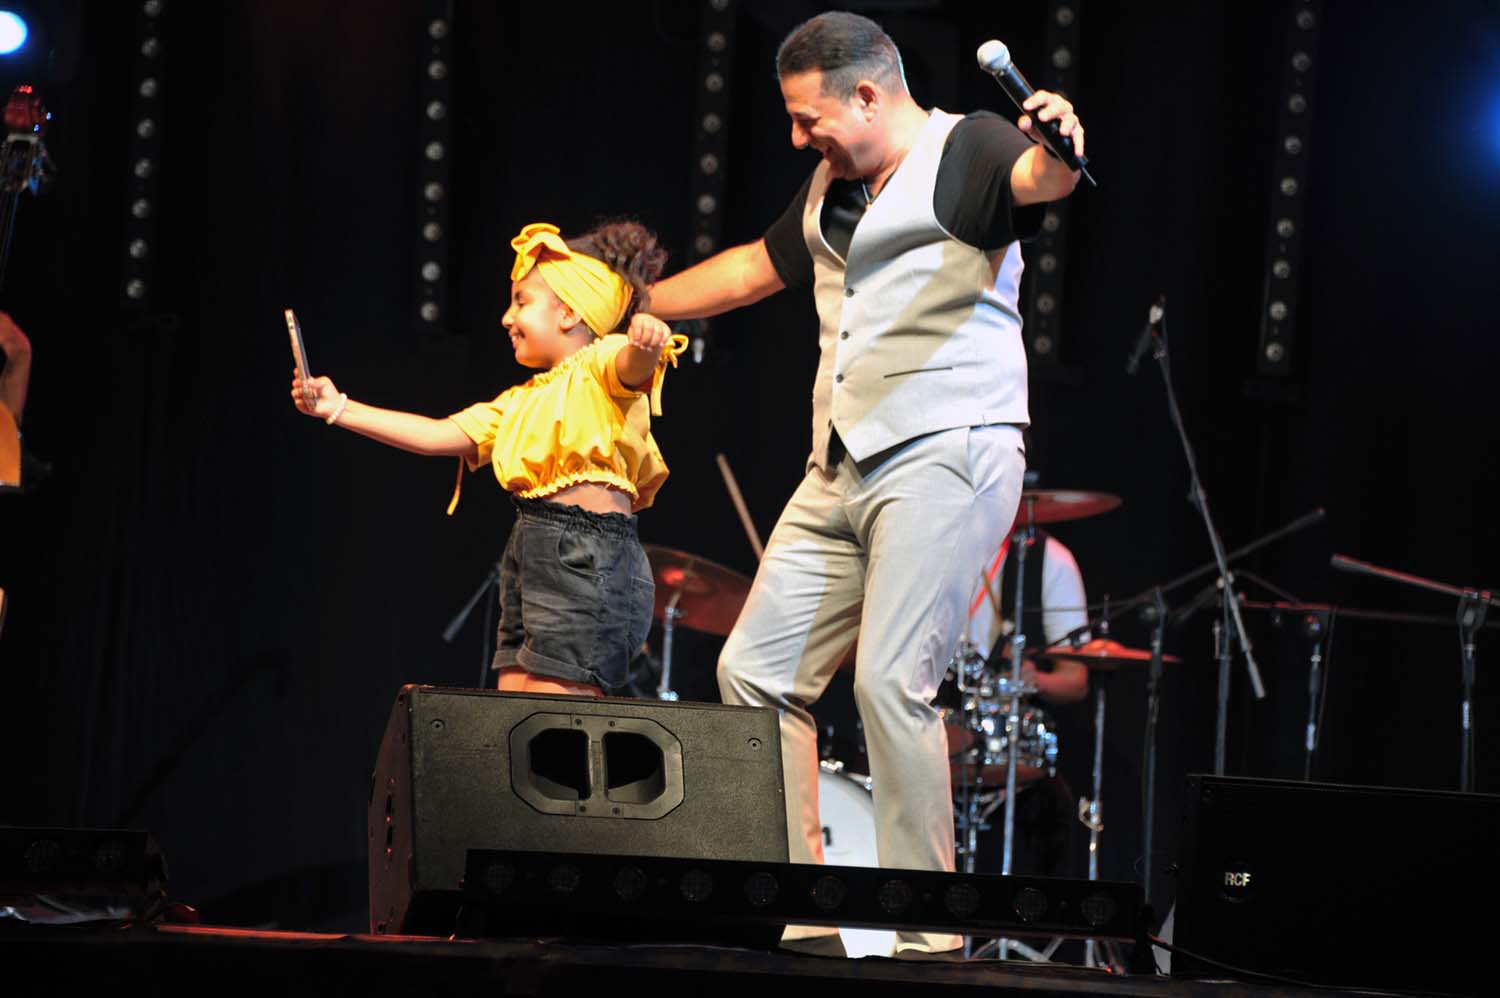 Kabbadj dancing with one of his fans on the stage